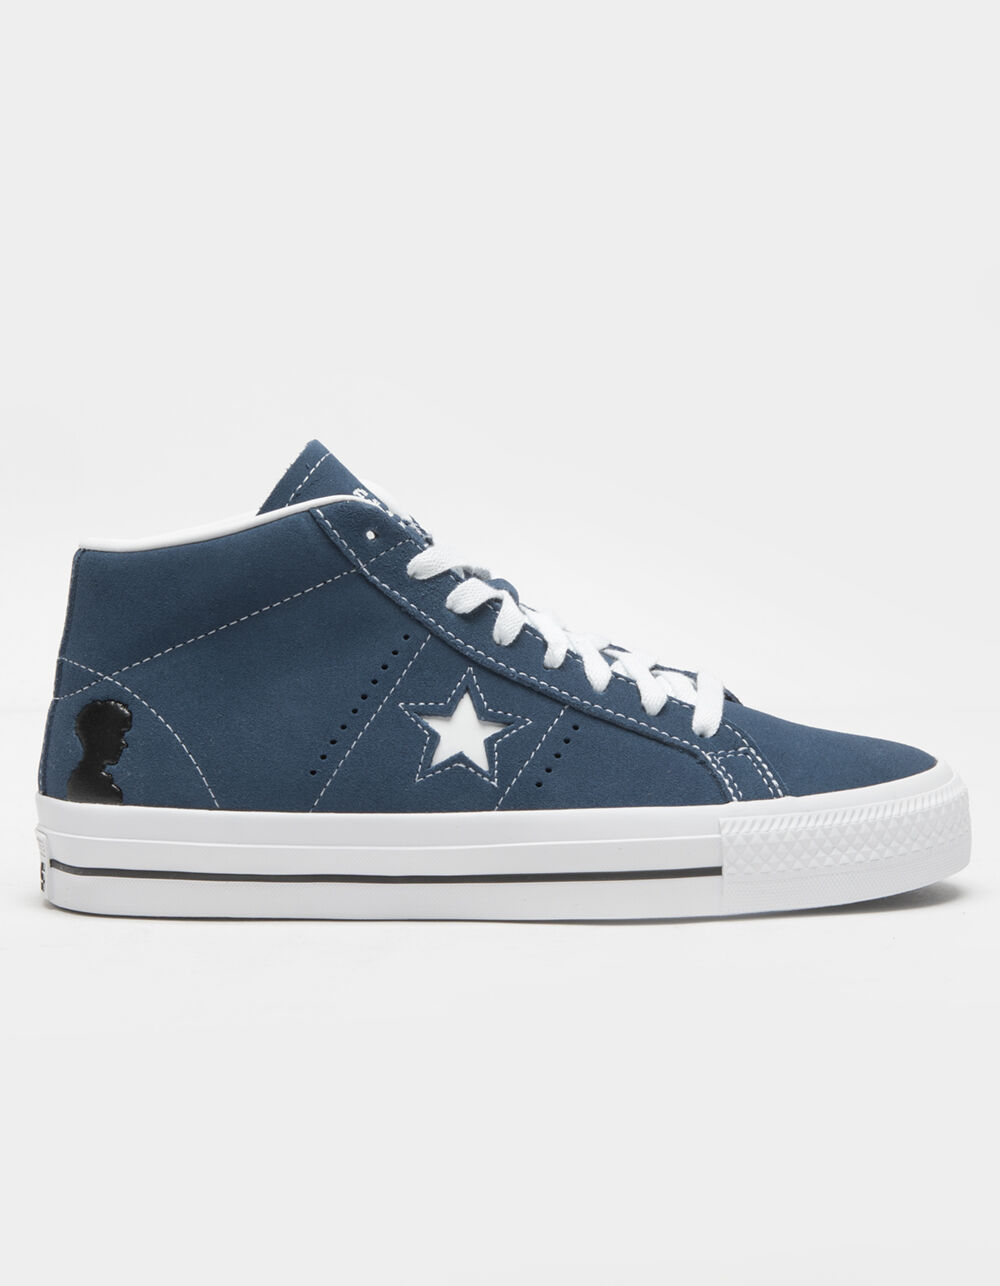 CONVERSE One Star Pro Mid Top Shoes - NAVY COMBO |